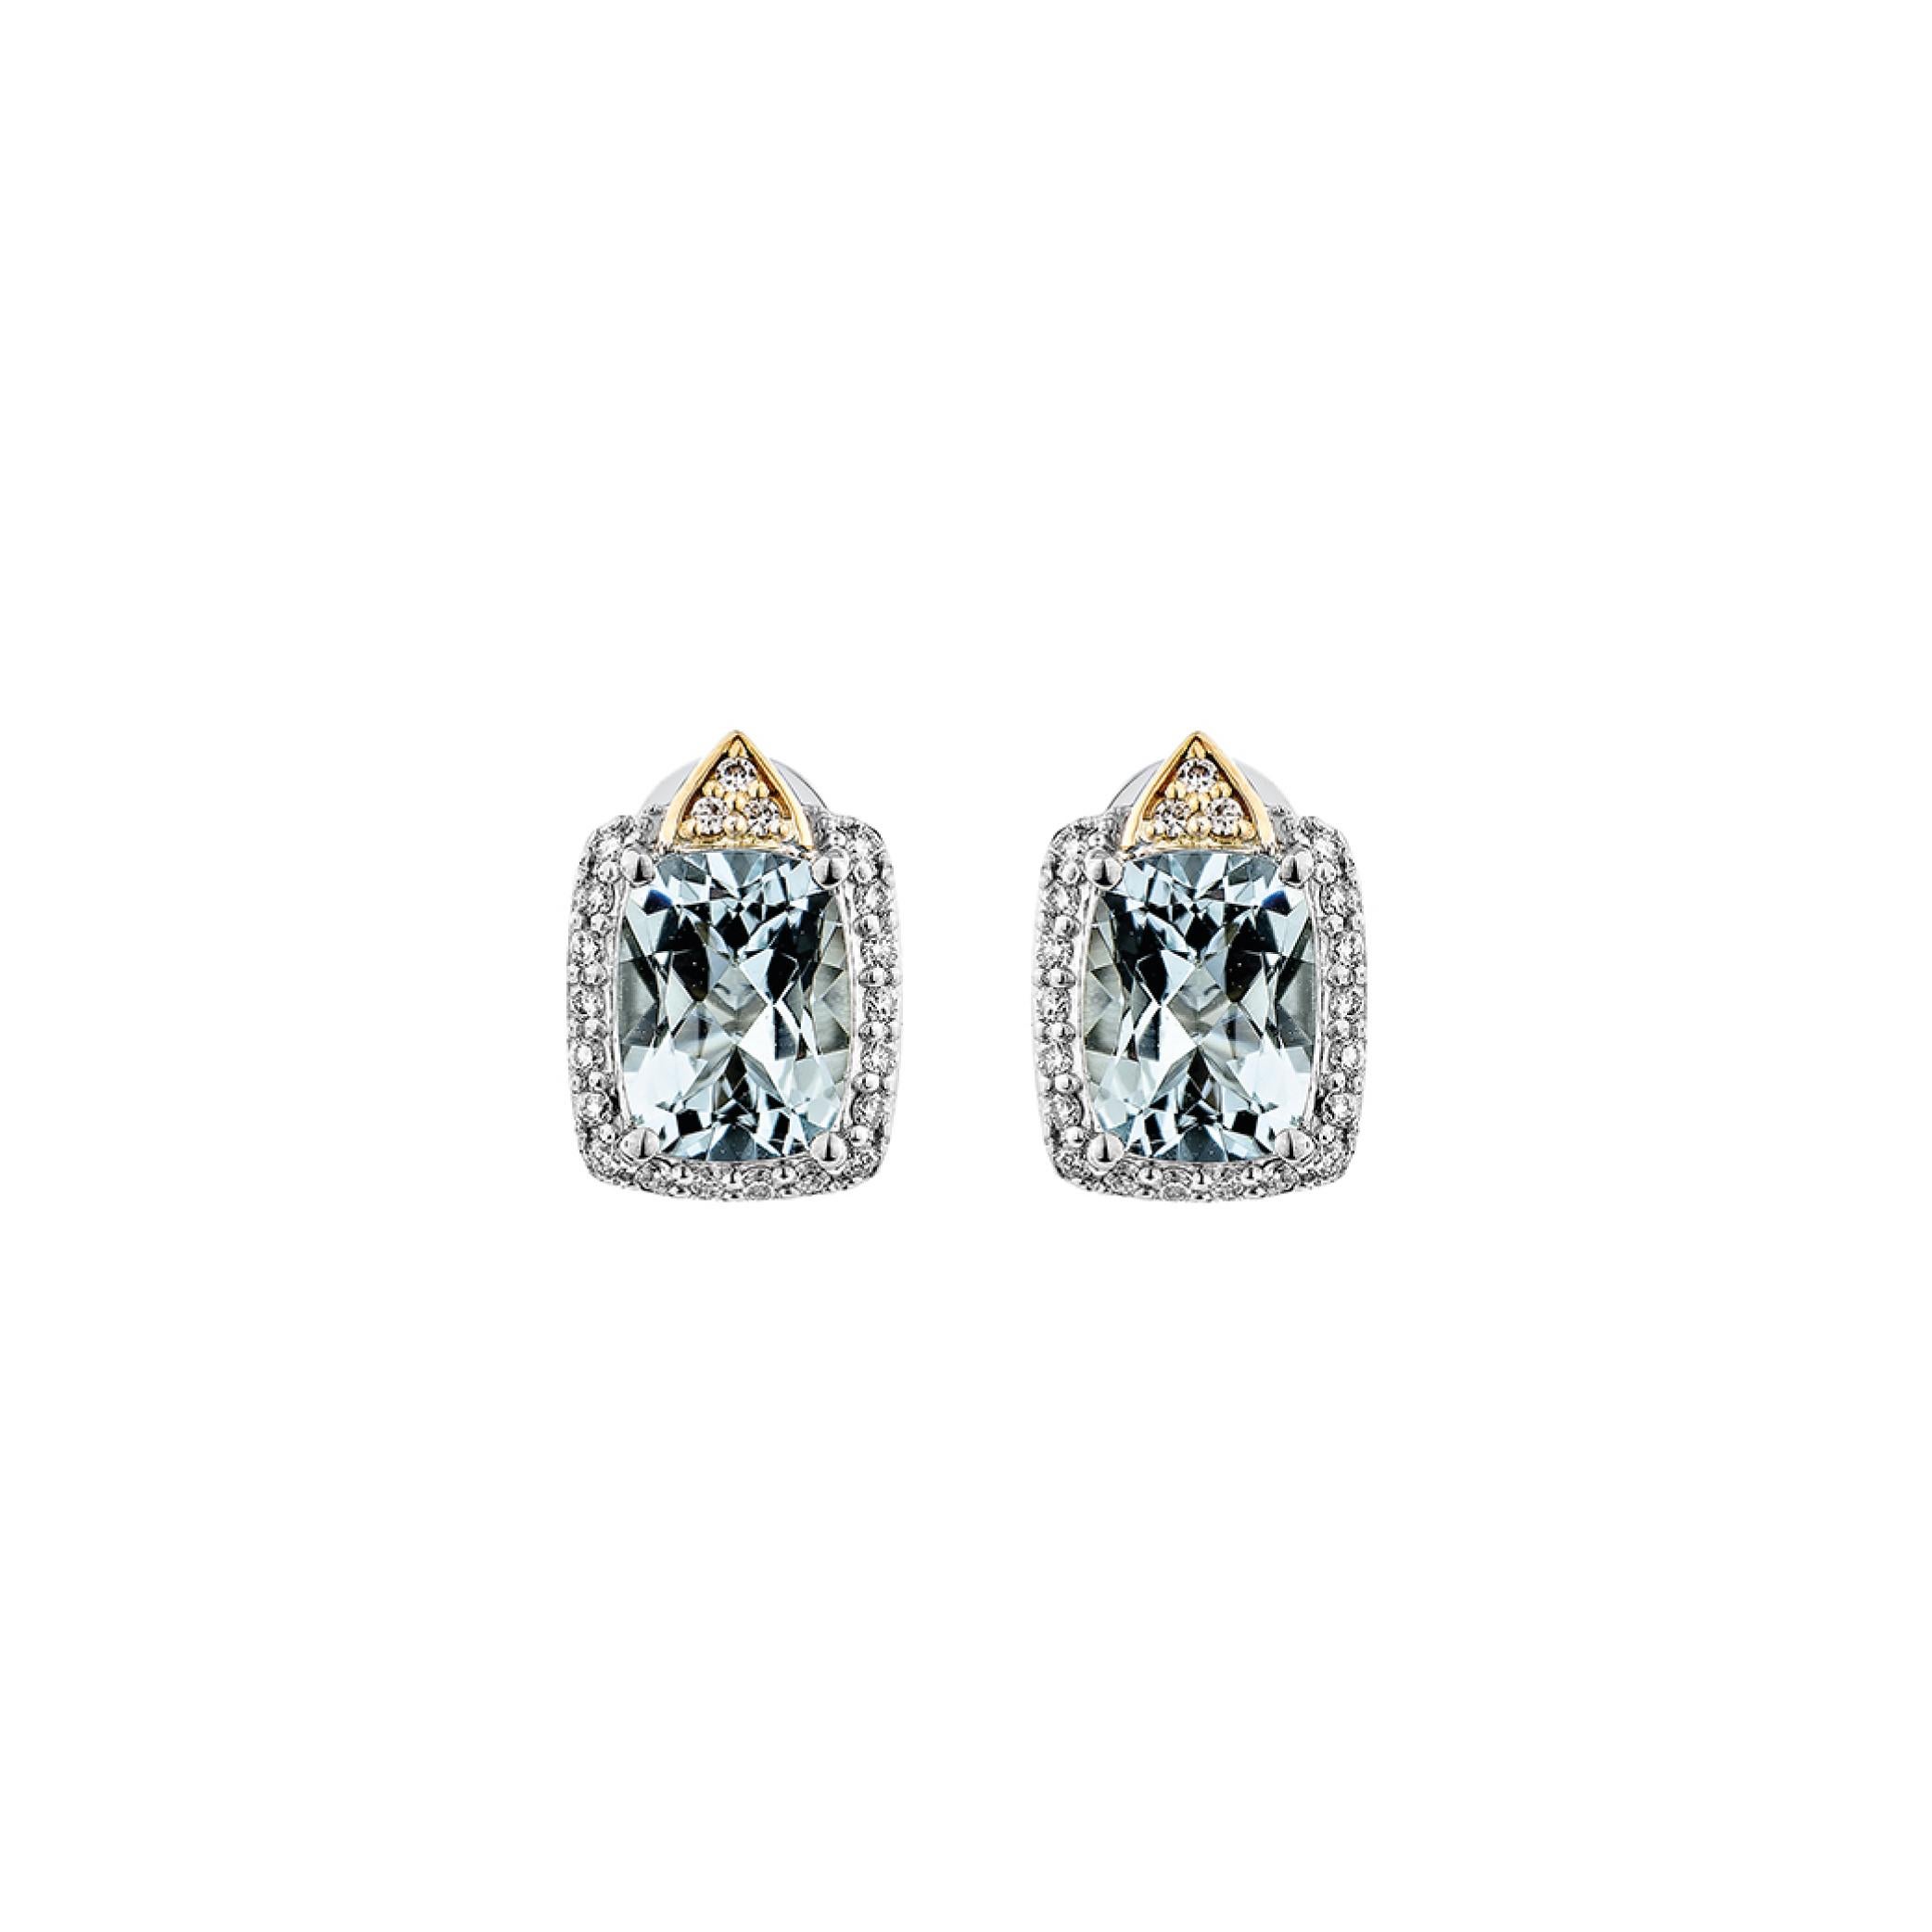 Contemporary 2.507 Carat Aquamarine Stud Earrings in 18KWRG with White Diamond. For Sale